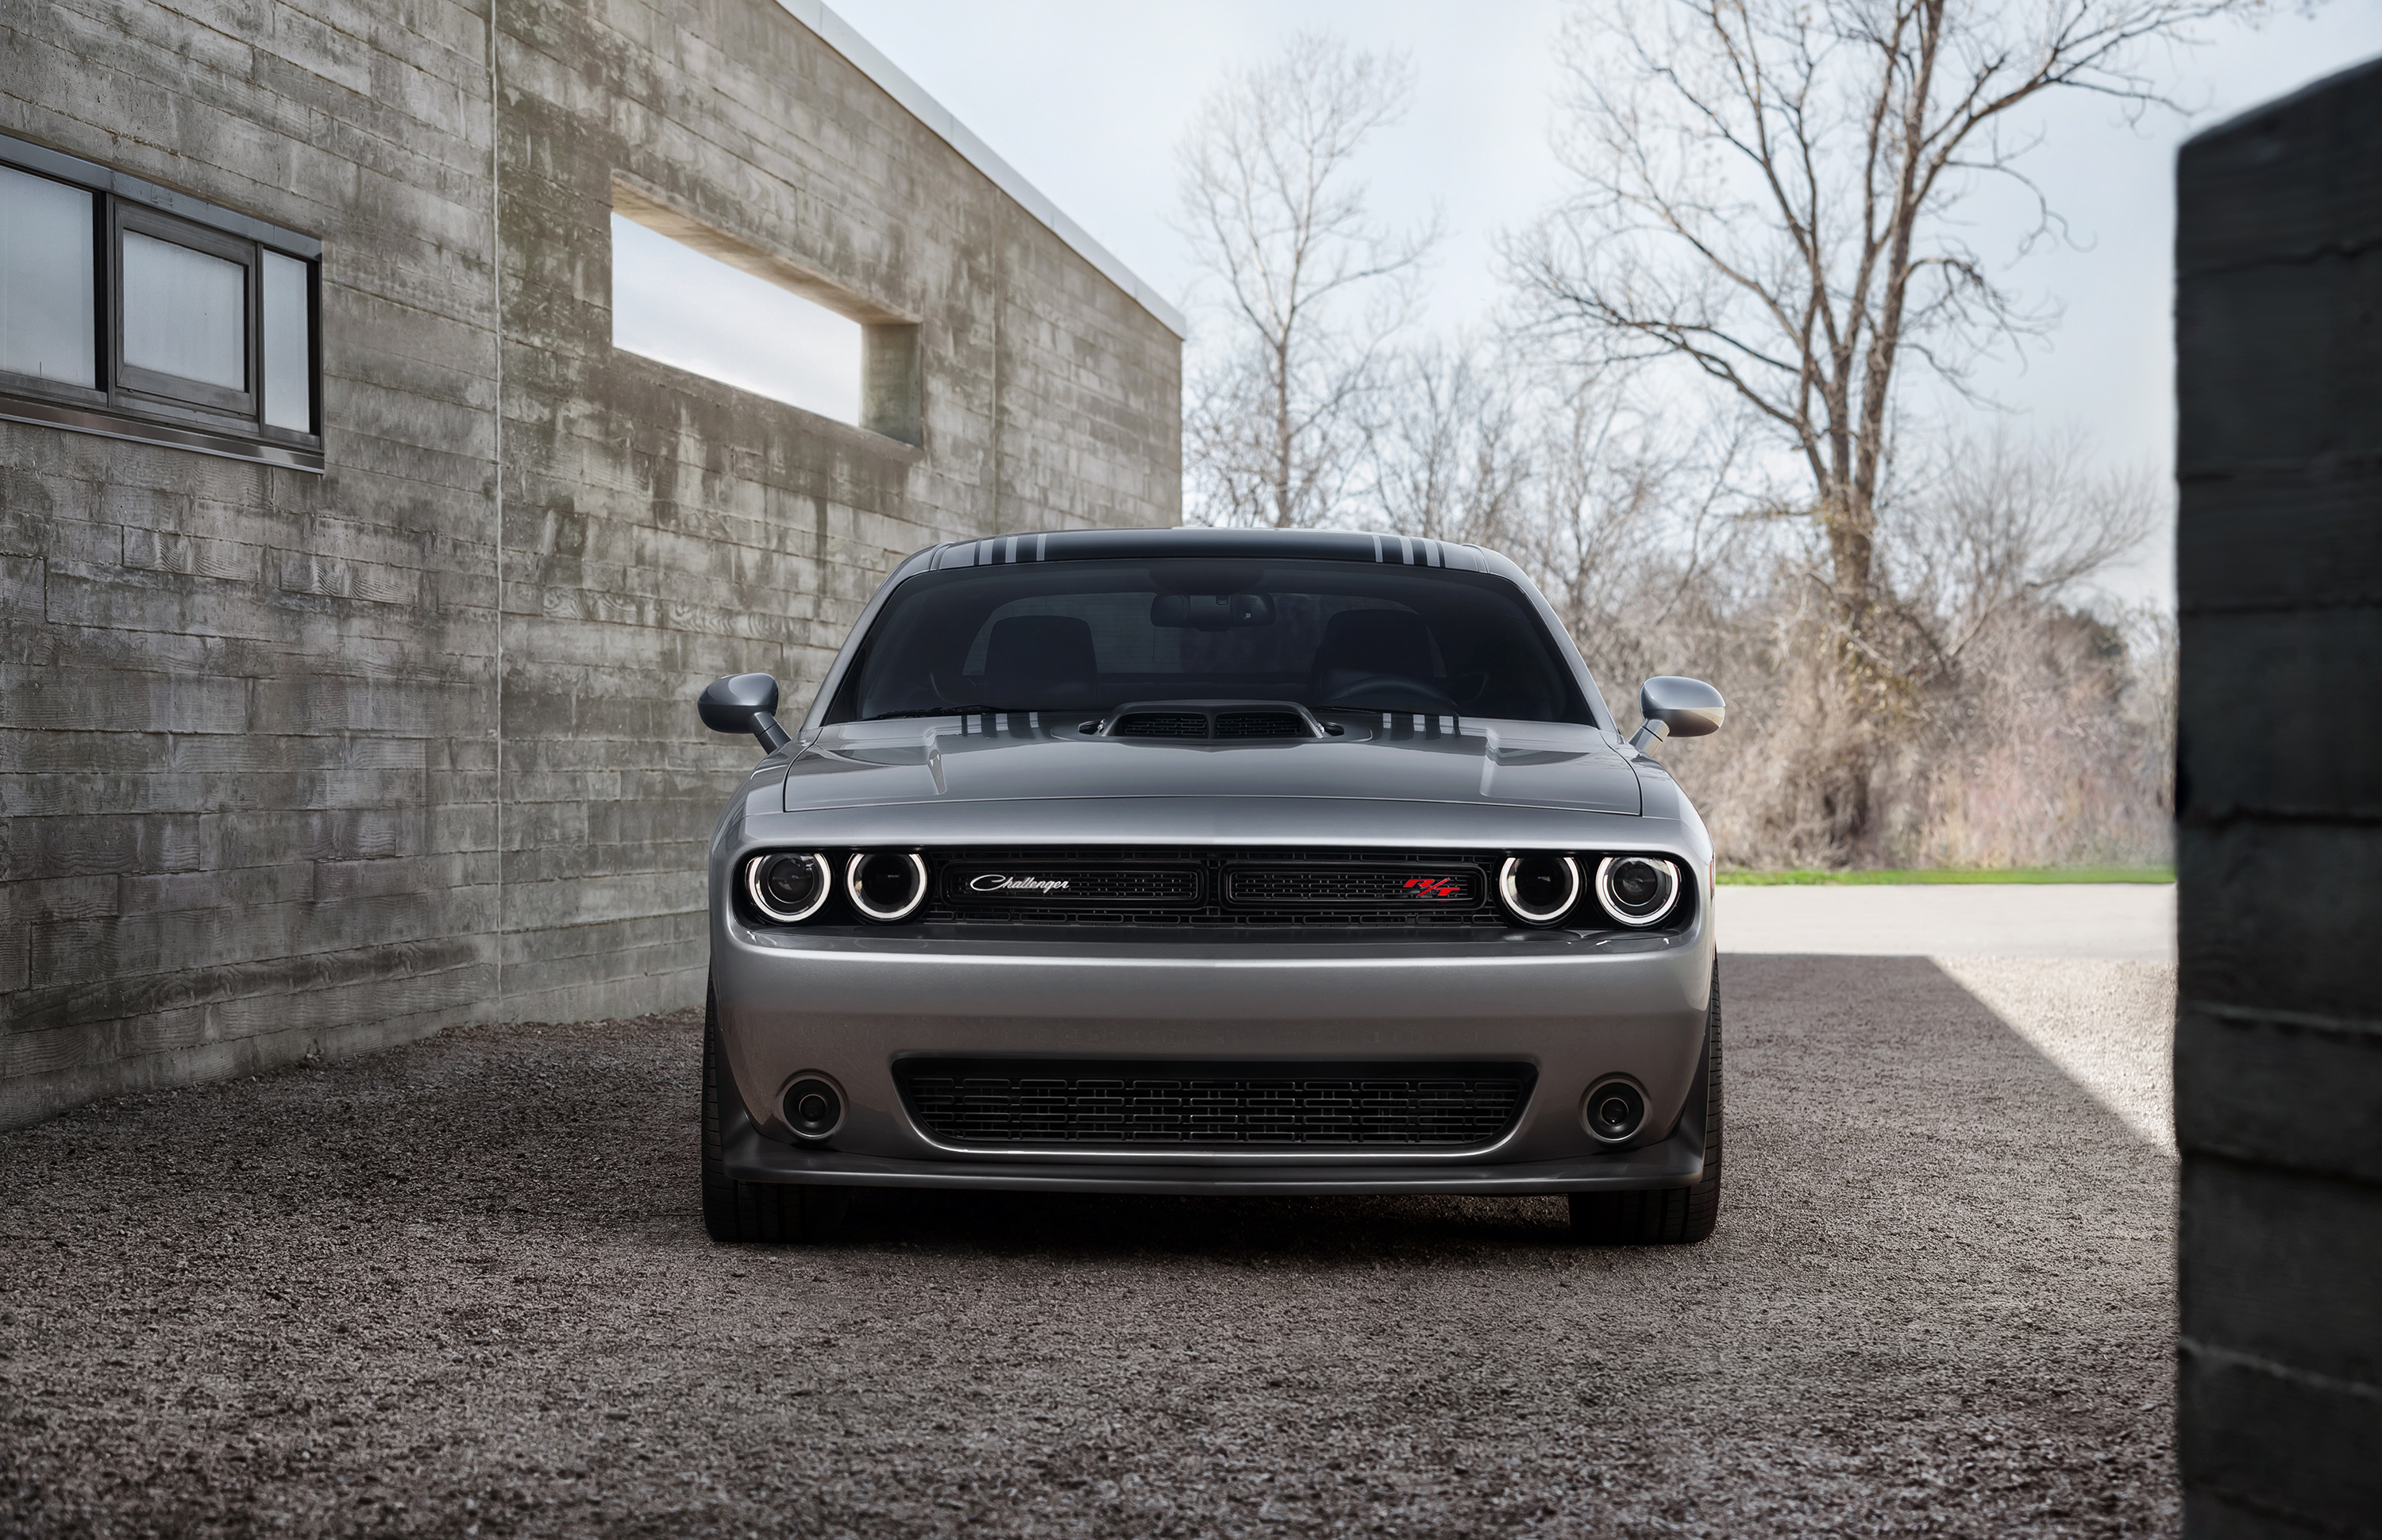 114283 download wallpaper dodge, cars, front view, grey, 2015, challenger, hemi, 392, scat pack shaker screensavers and pictures for free